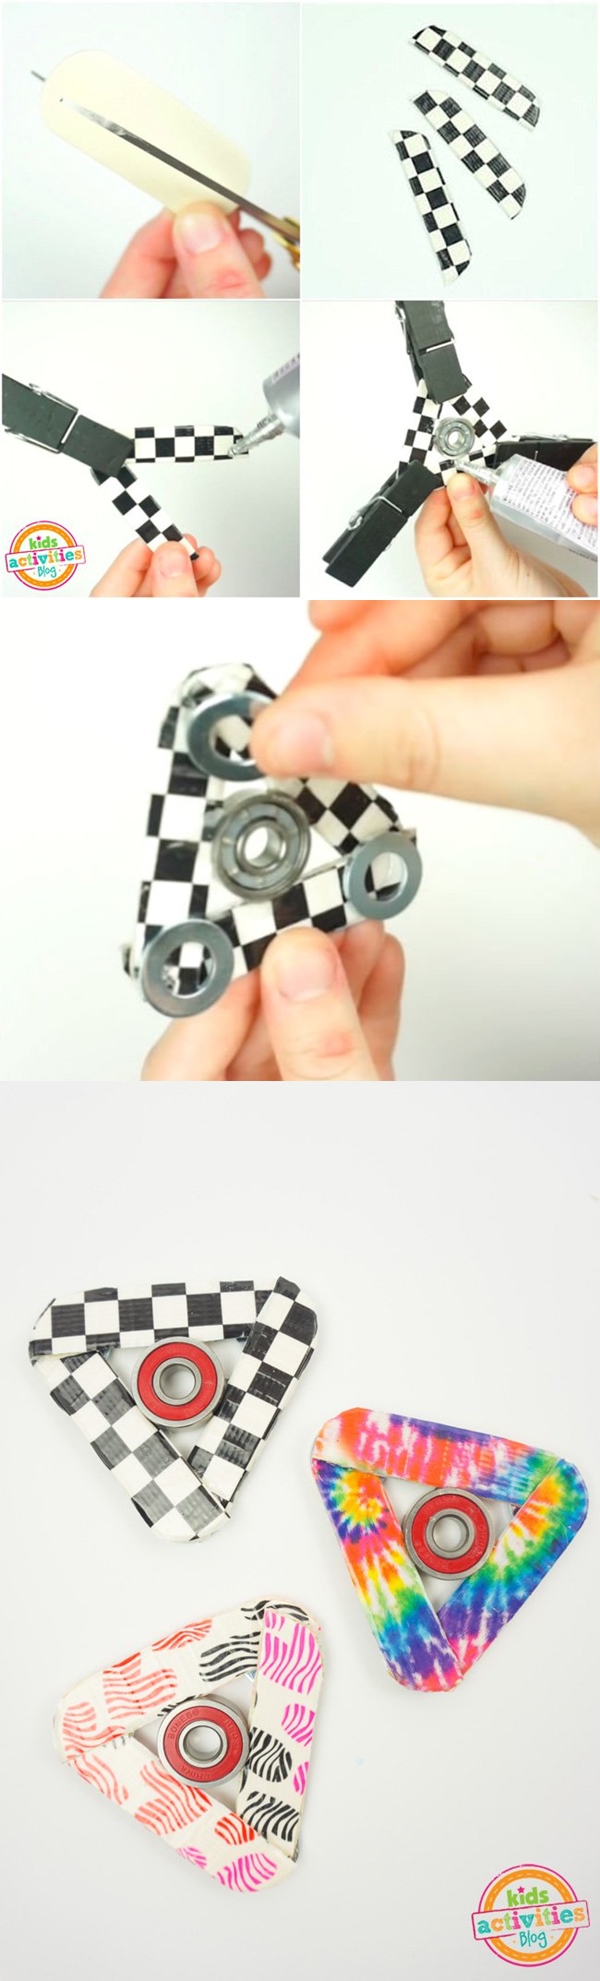 Simple-Ways-to-Decorate-Your-Fidget-Spinner